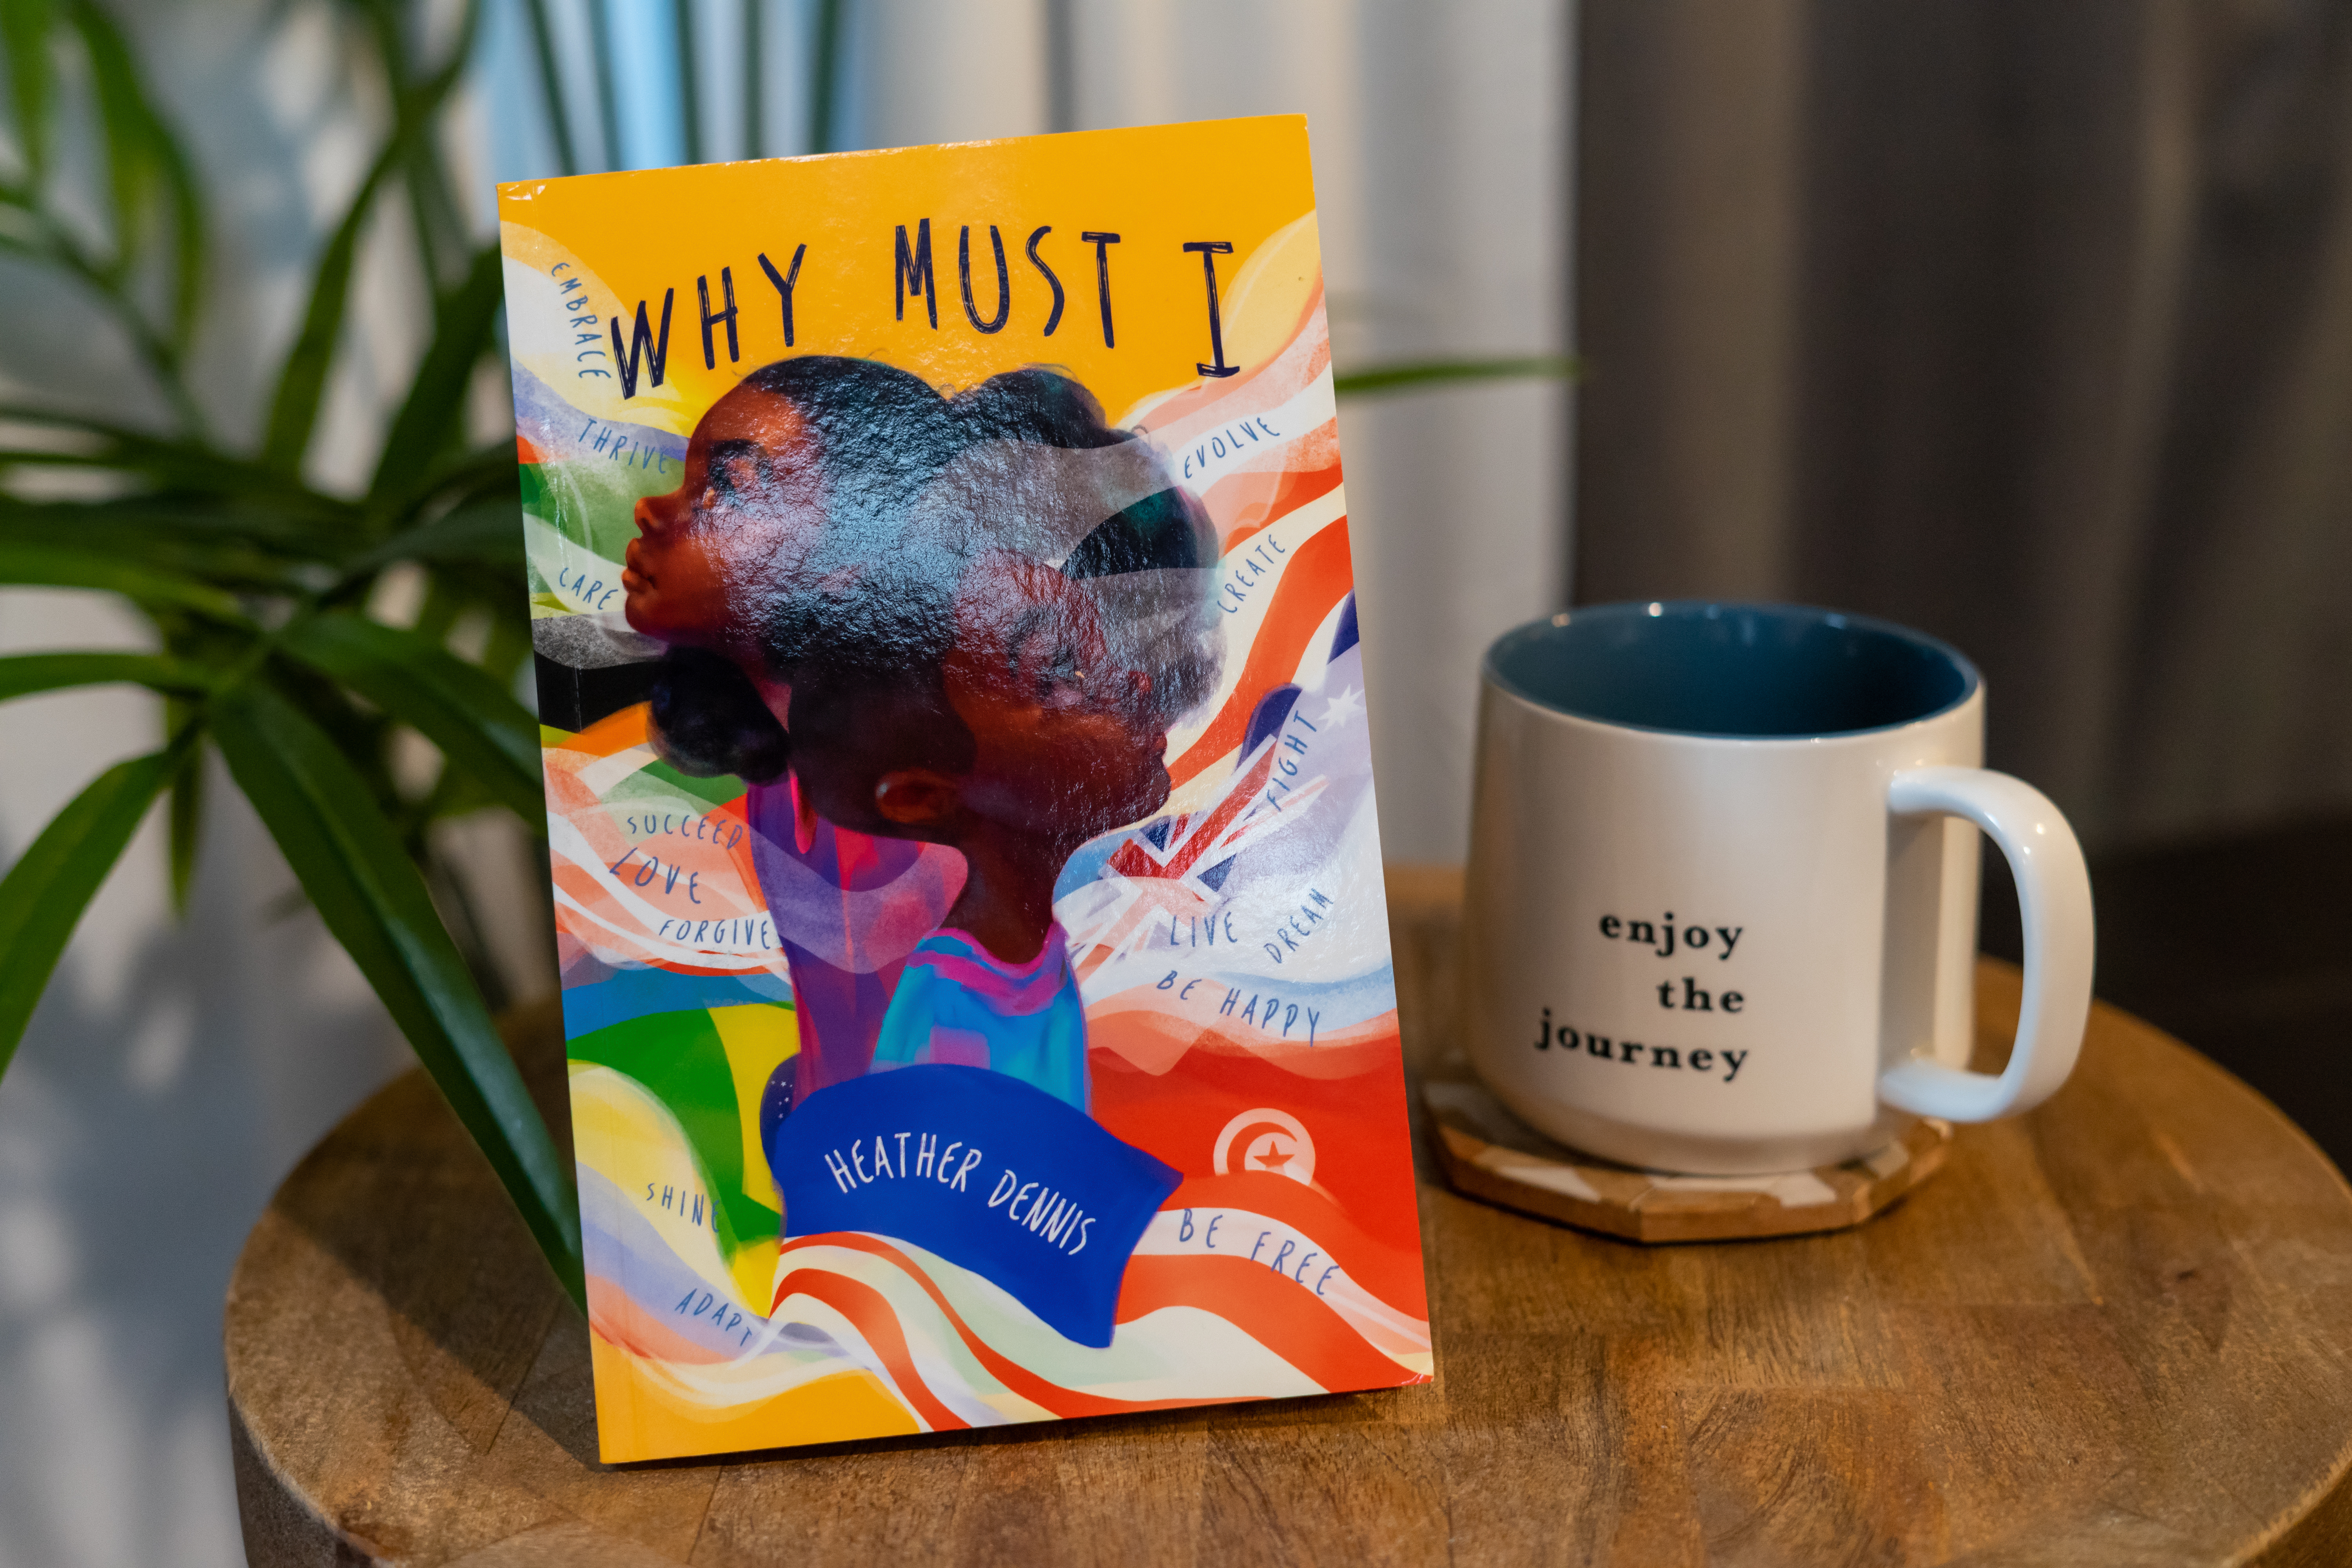 Why Must I by Heather Dennis